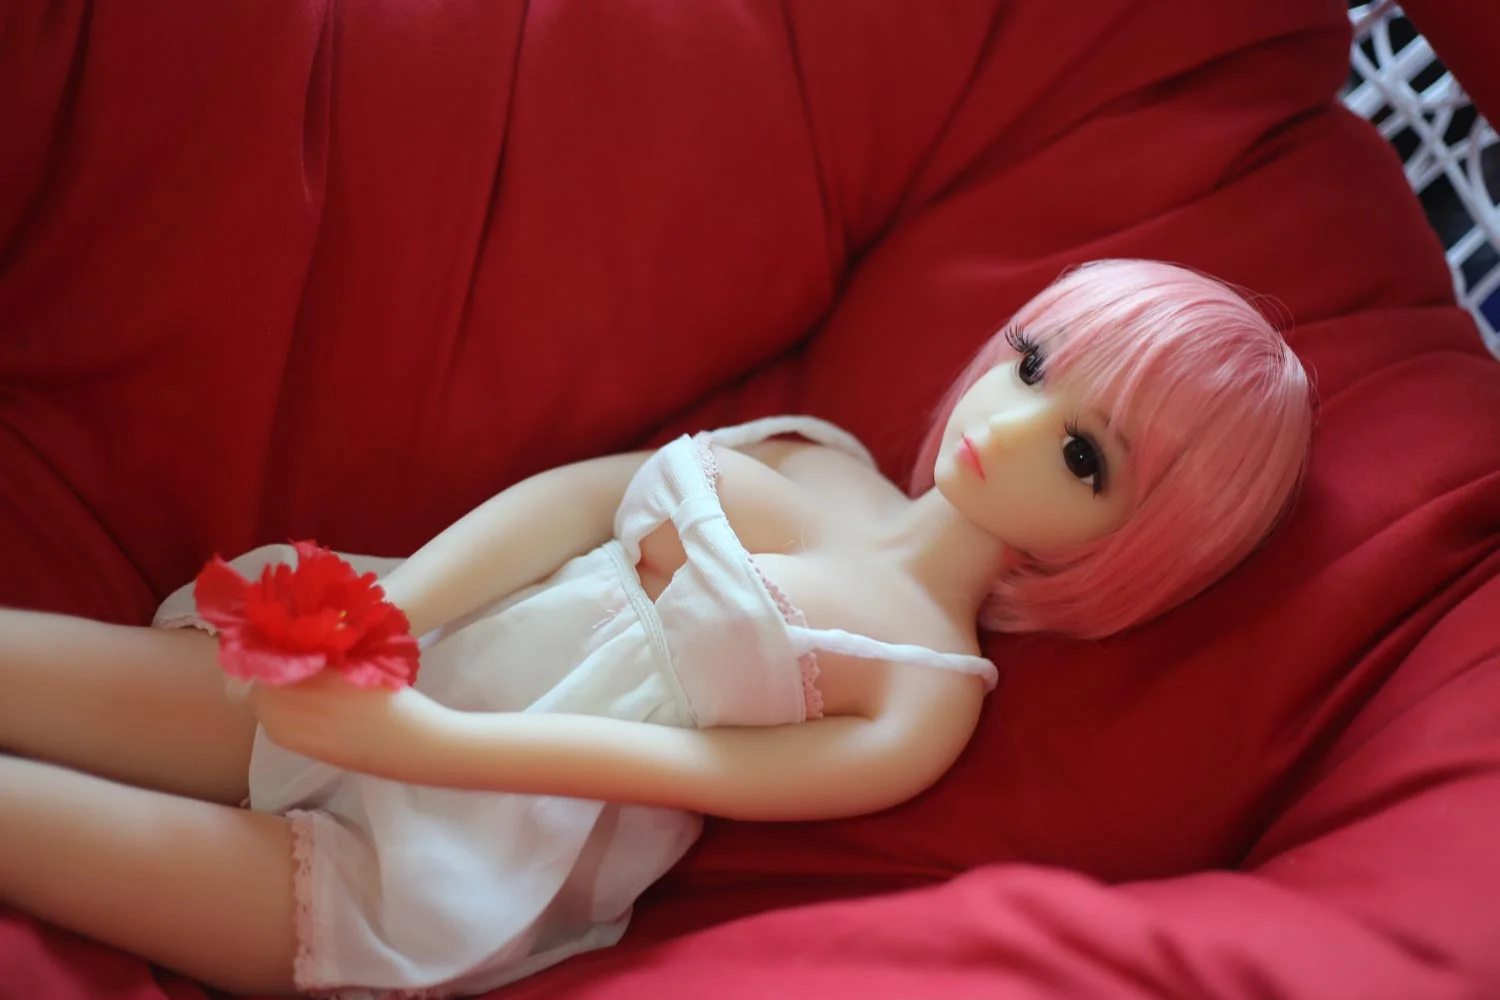 Mini sex doll lying down holding red flowers